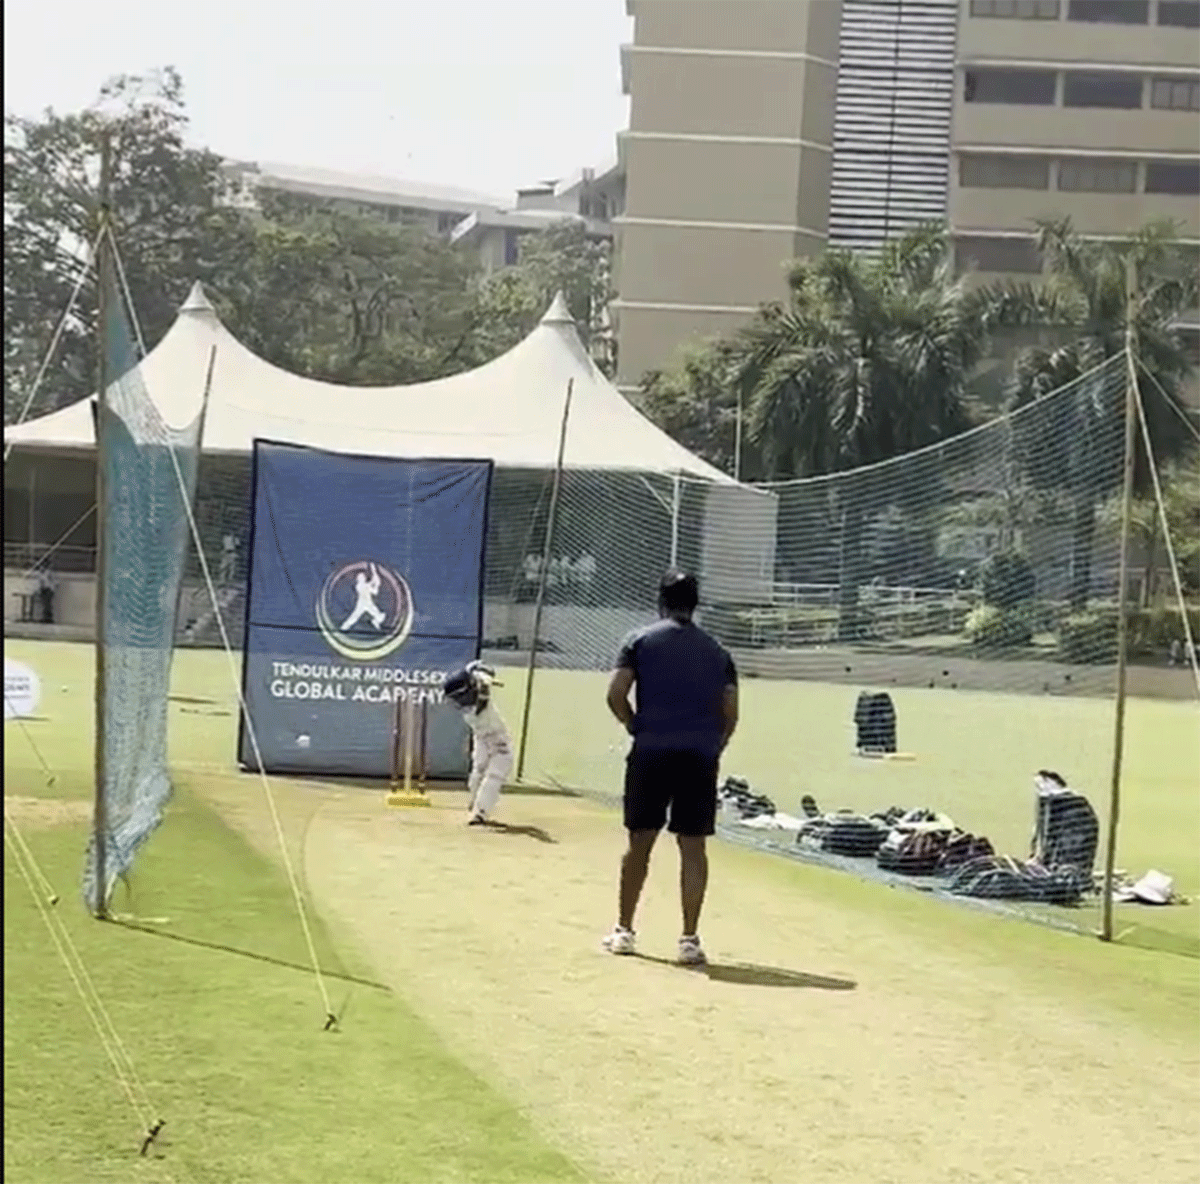 SK Shahid bats while training at the Middlesex Global Academy in Mumbai on Thursday